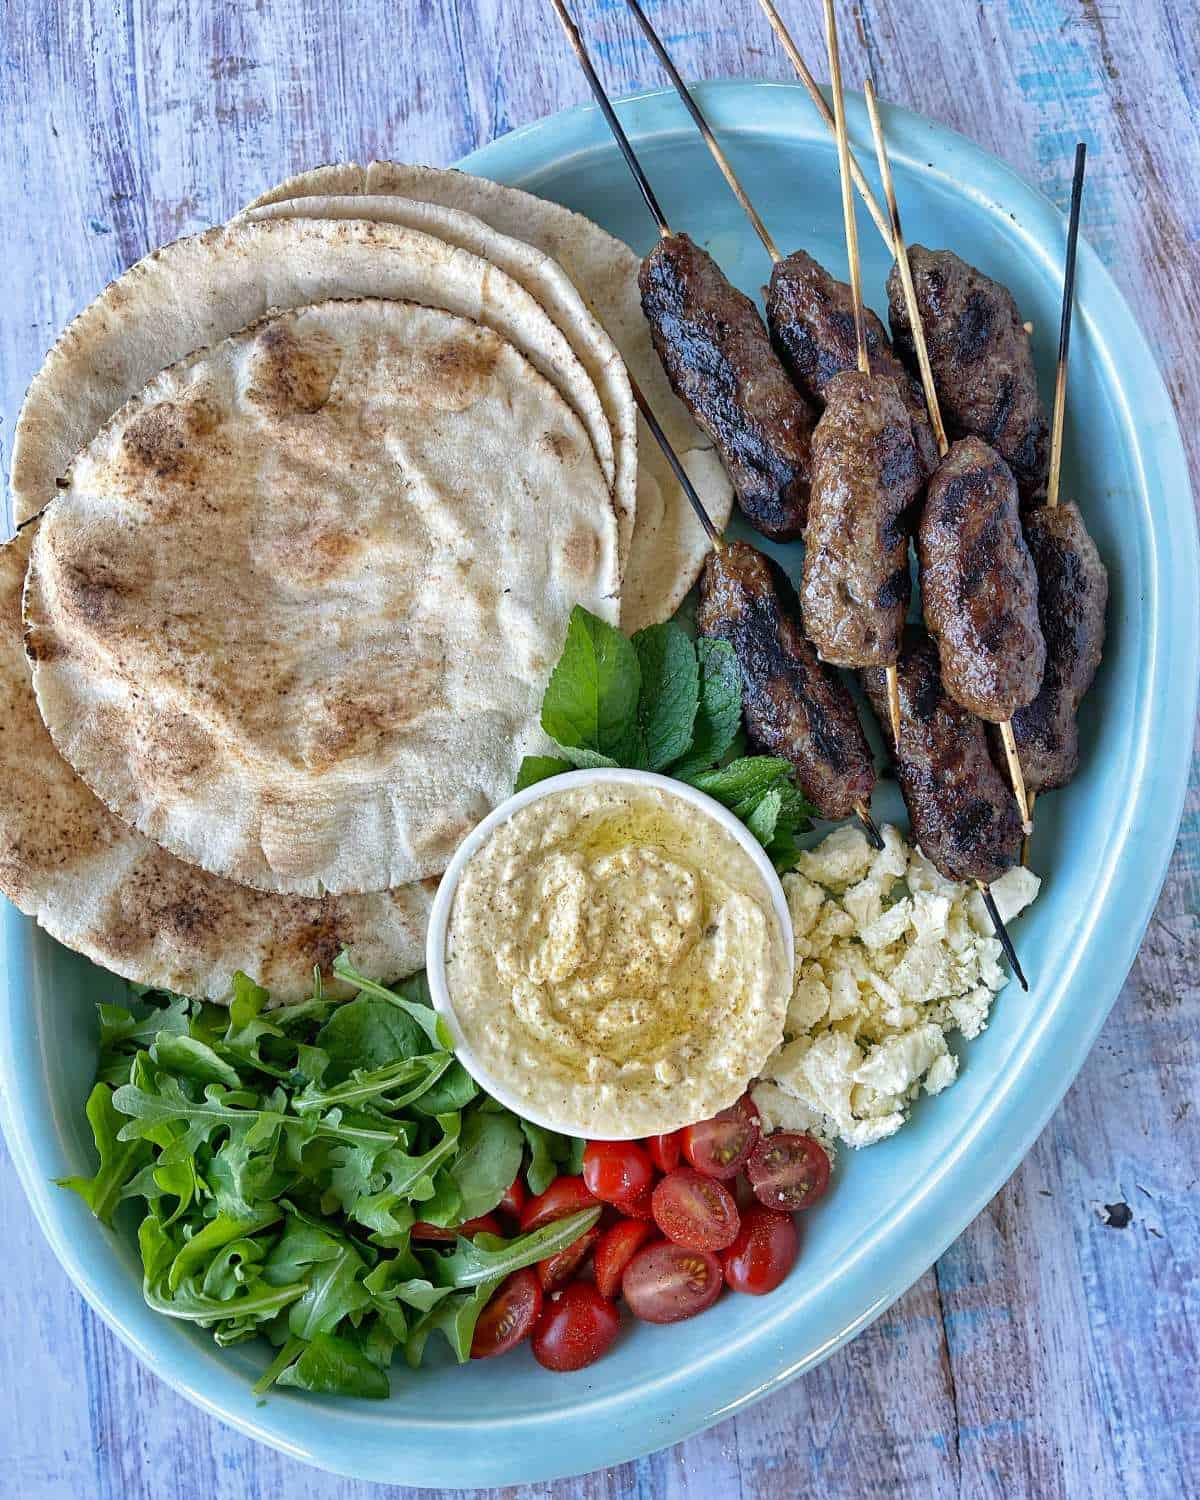 Lamb koftas and vegetables and wraps on a blue platter.